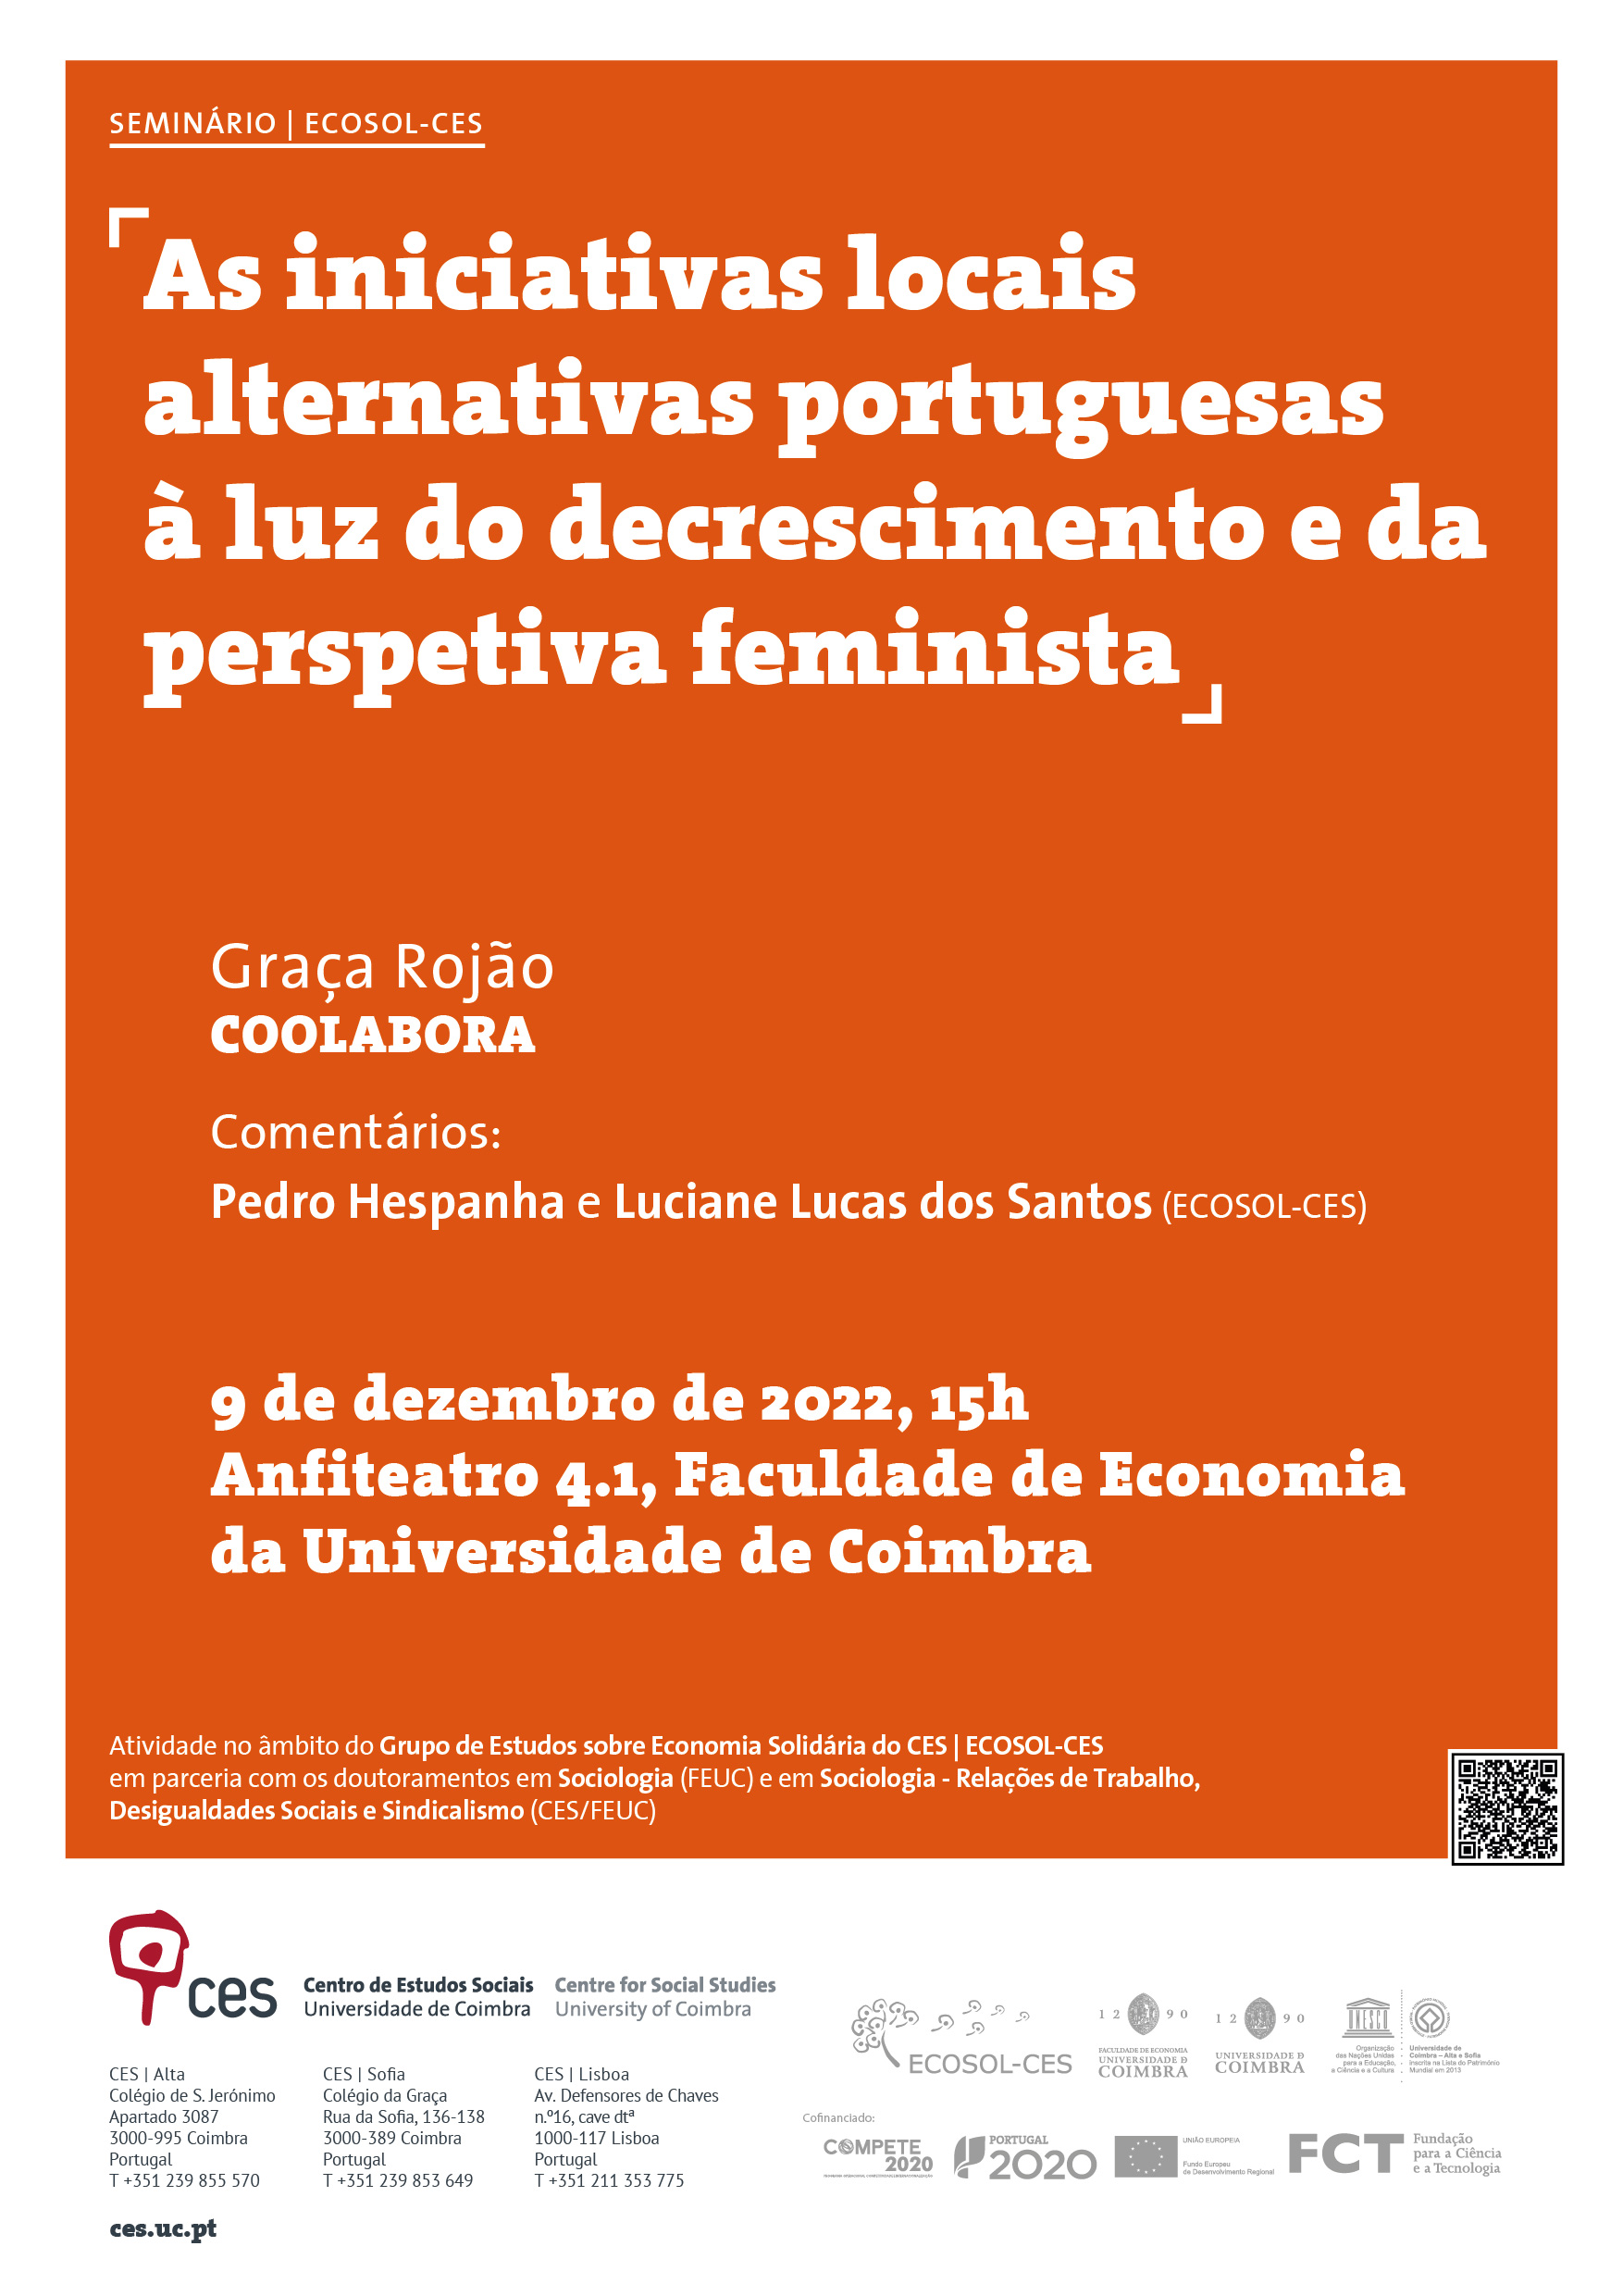 Portuguese alternative local initiatives in the light of degrowth and the feminist perspective<span id="edit_40802"><script>$(function() { $('#edit_40802').load( "/myces/user/editobj.php?tipo=evento&id=40802" ); });</script></span>